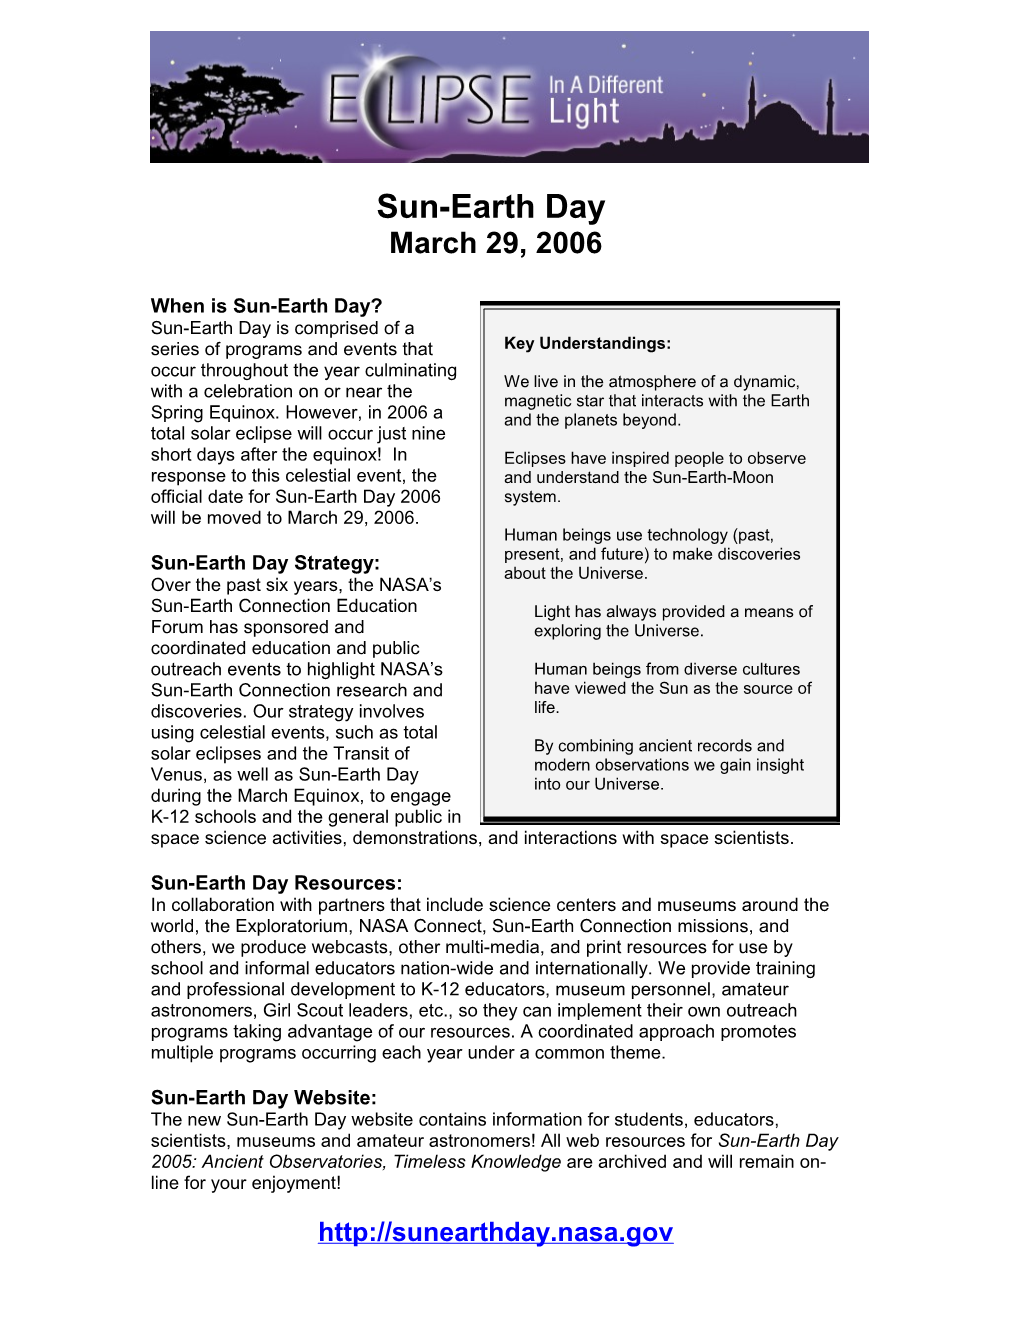 When Is Sun-Earth Day?